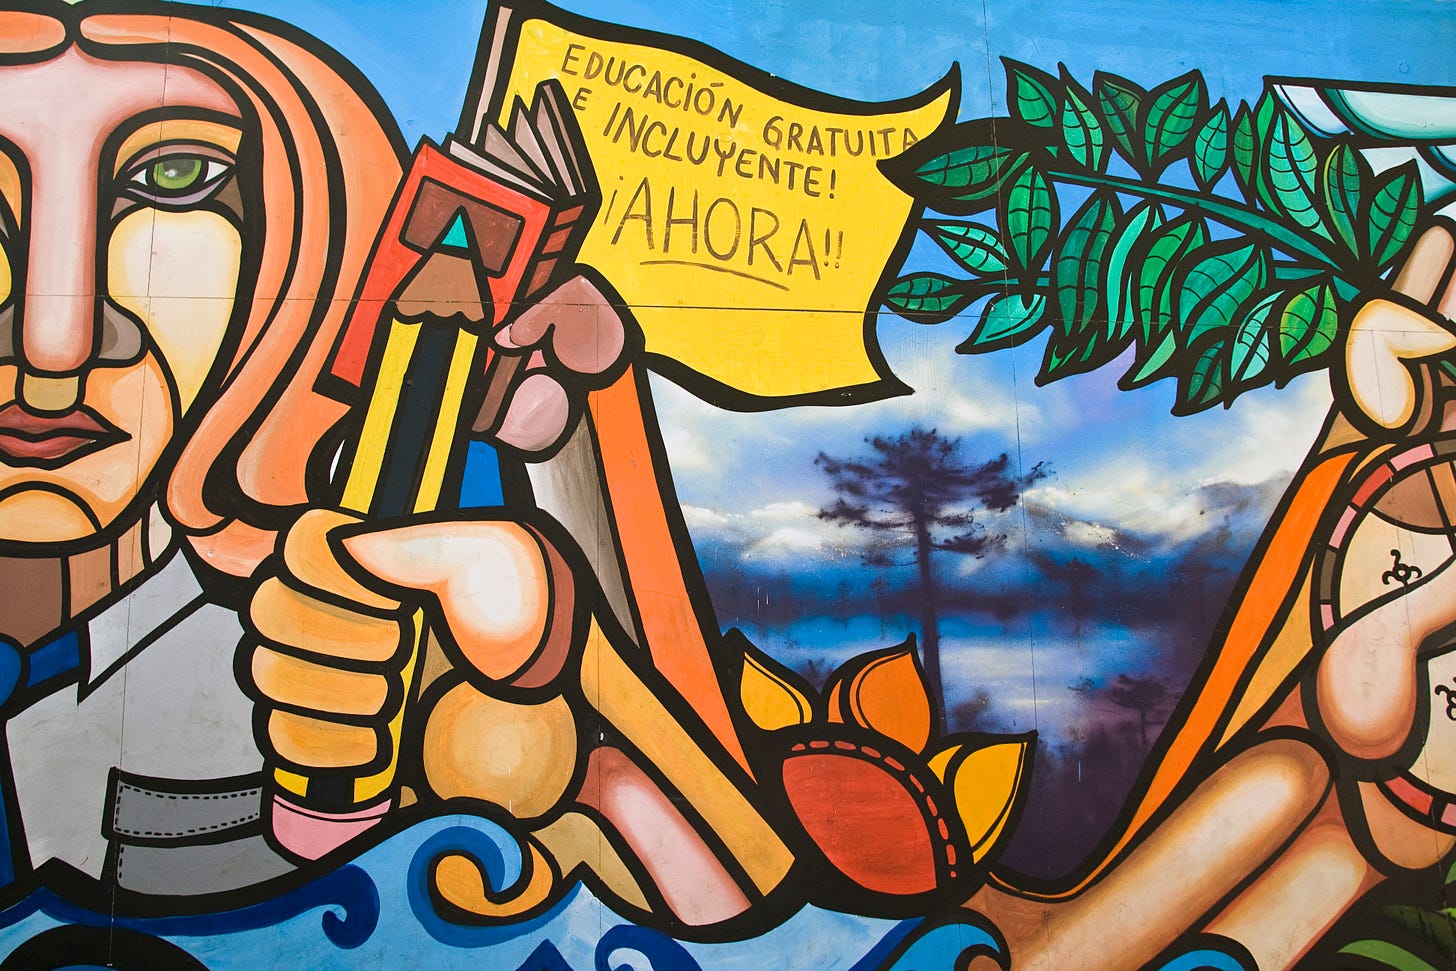 A painted mural that says Free Education for All in Spanish.